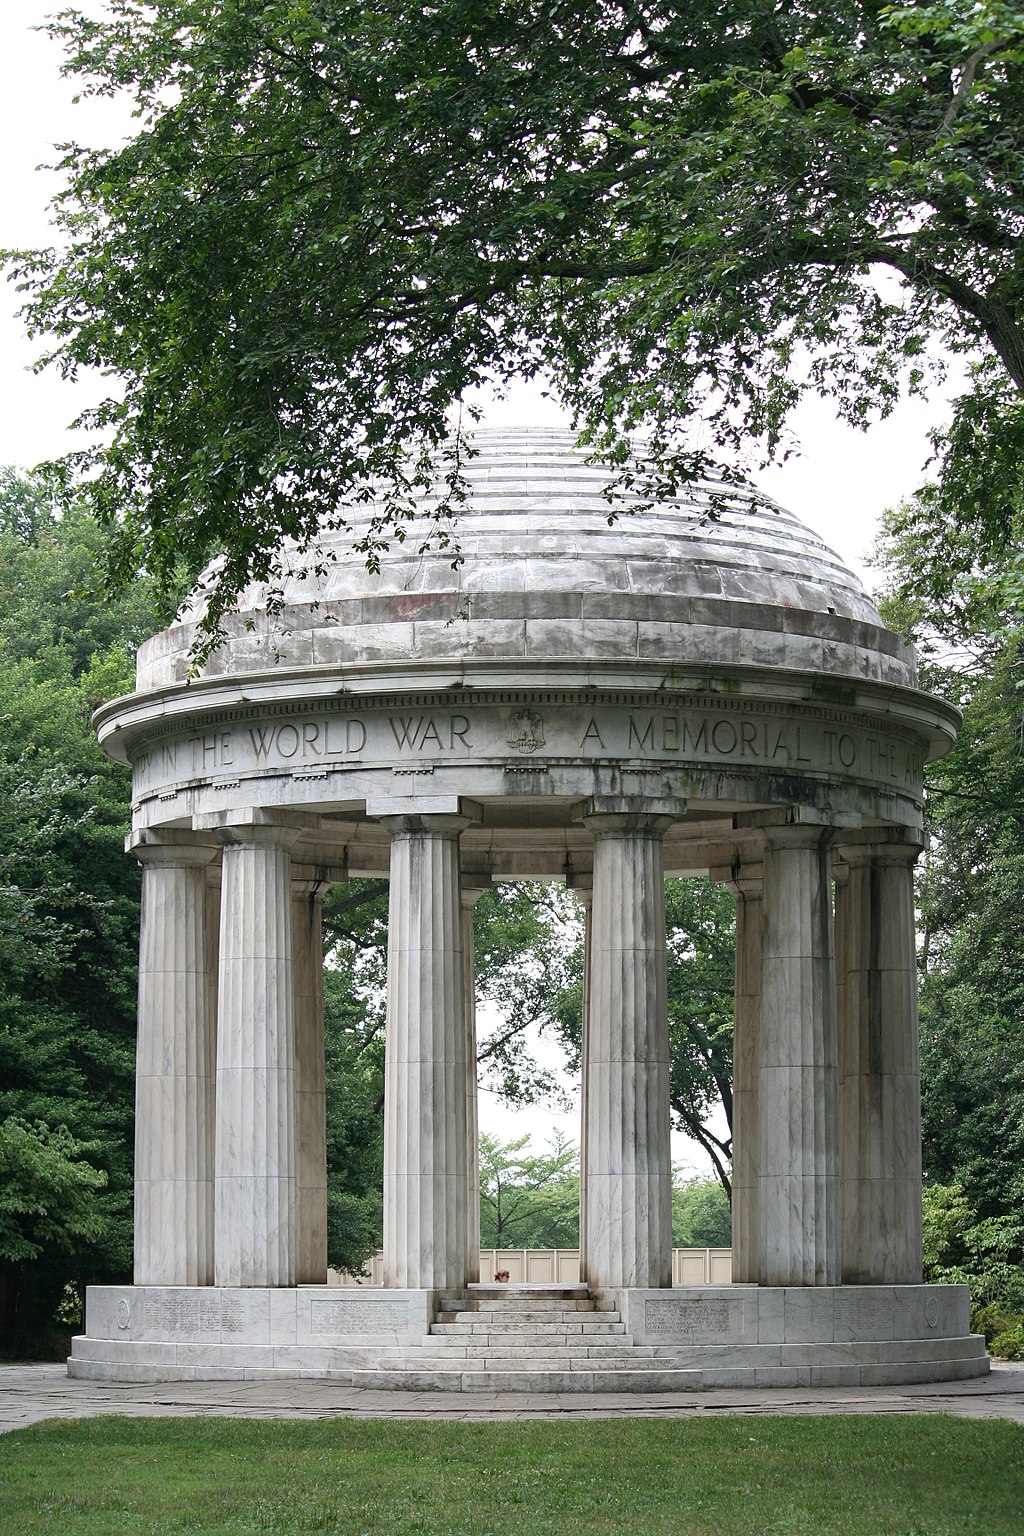 The District of Columbia War Memorial was built as a contemporary bandstand with a neoclassical design, with marble, columns, and a dome reminiscent of ancient Greece and Rome. Photo courtesy of 350z33, Wikimedia.